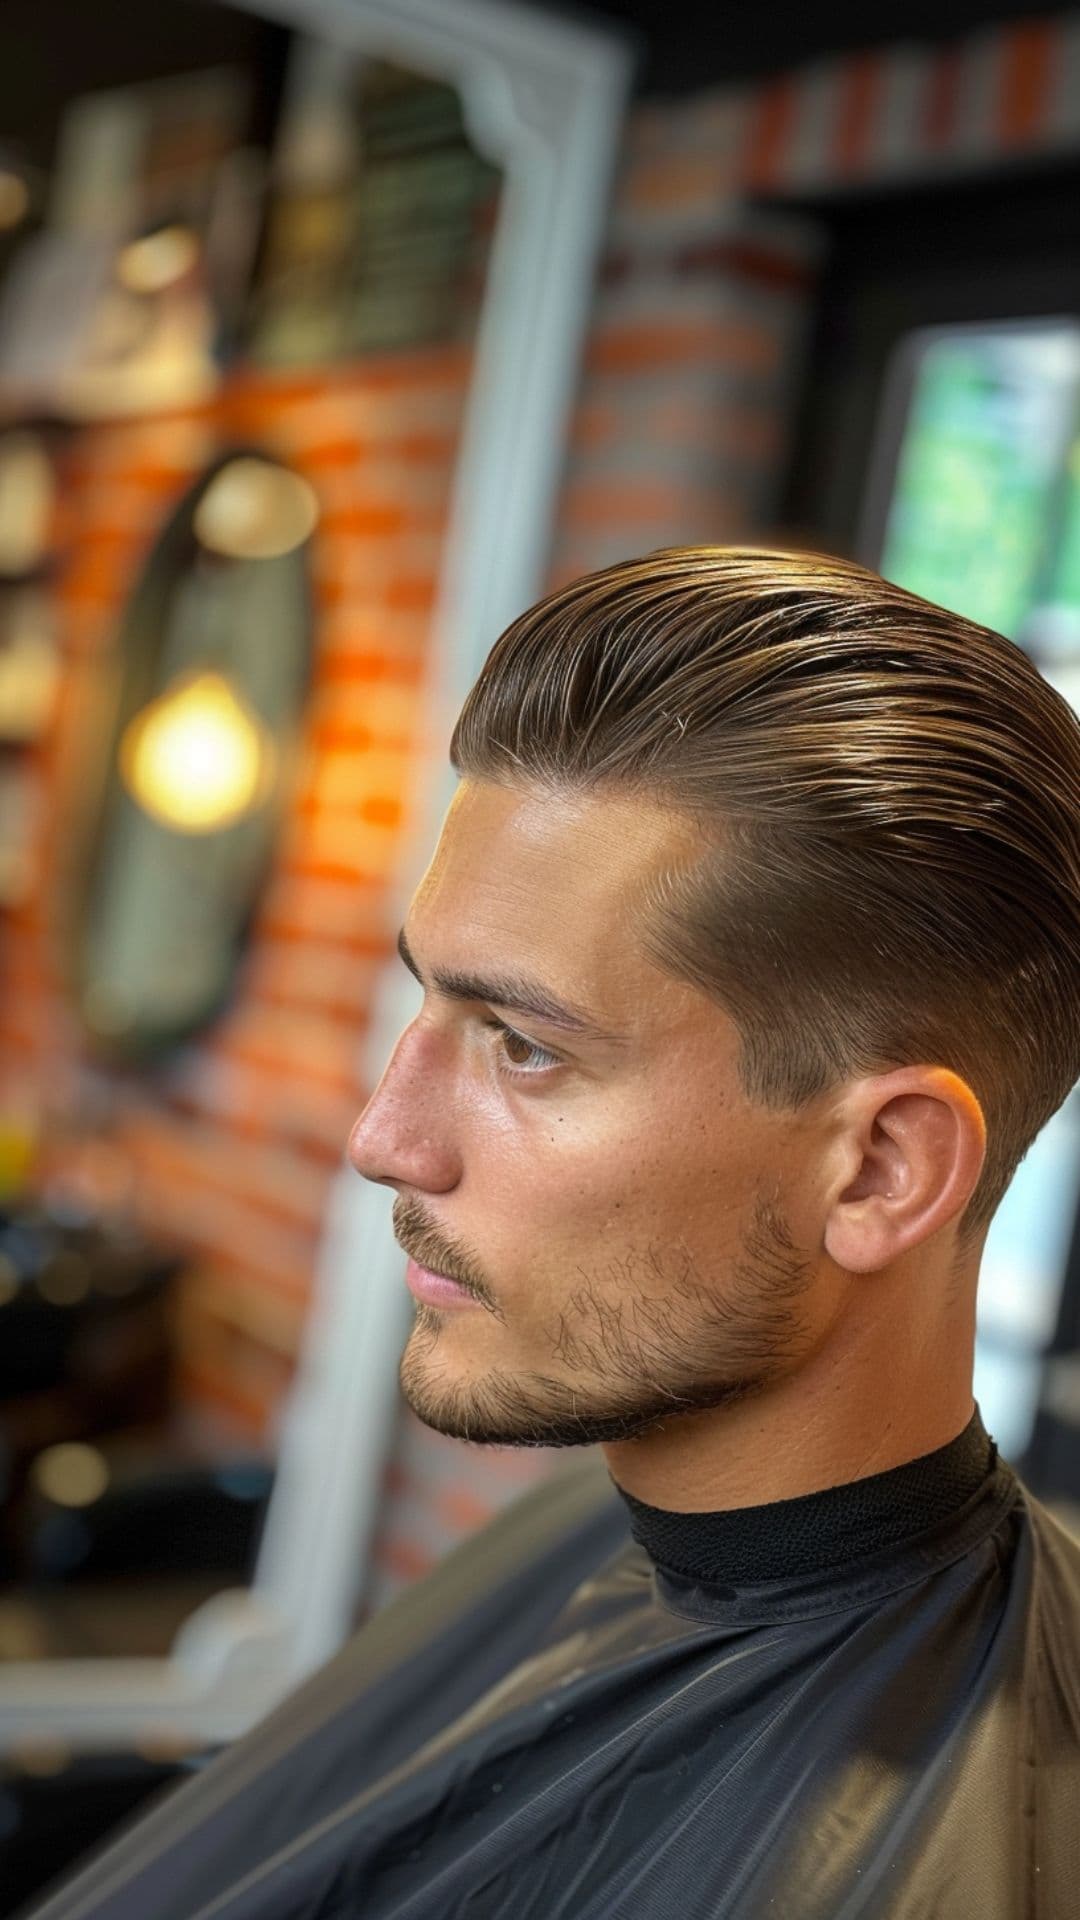 A middle aged man modelling a slicked back haircut.